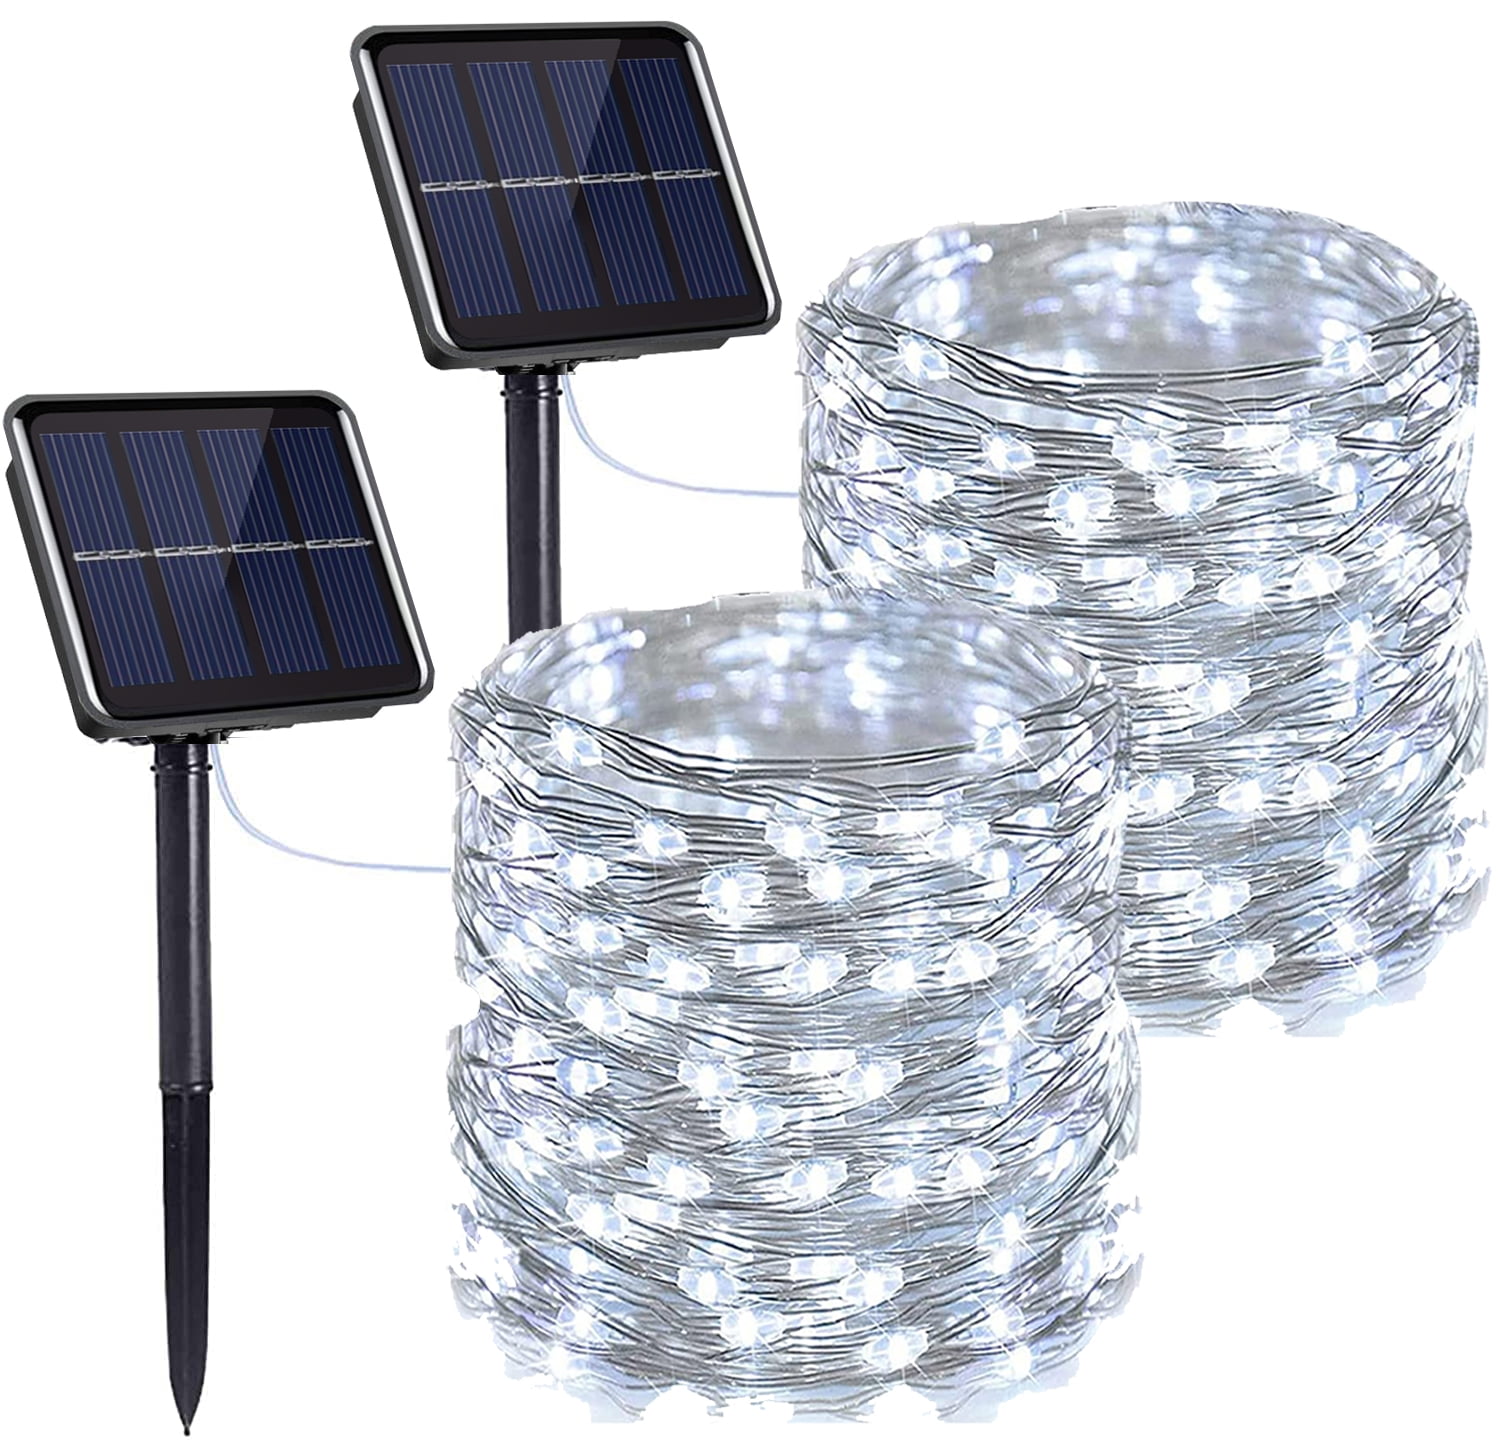 50 LED, Cool White Upgraded Solar Powered String Lights 2 Pack 8 Modes 50 LED Solar Fairy Lights Waterproof 16ft Silver Wire Lights Outdoor Garden String Lights for Home Patio Yard Party Decoration 